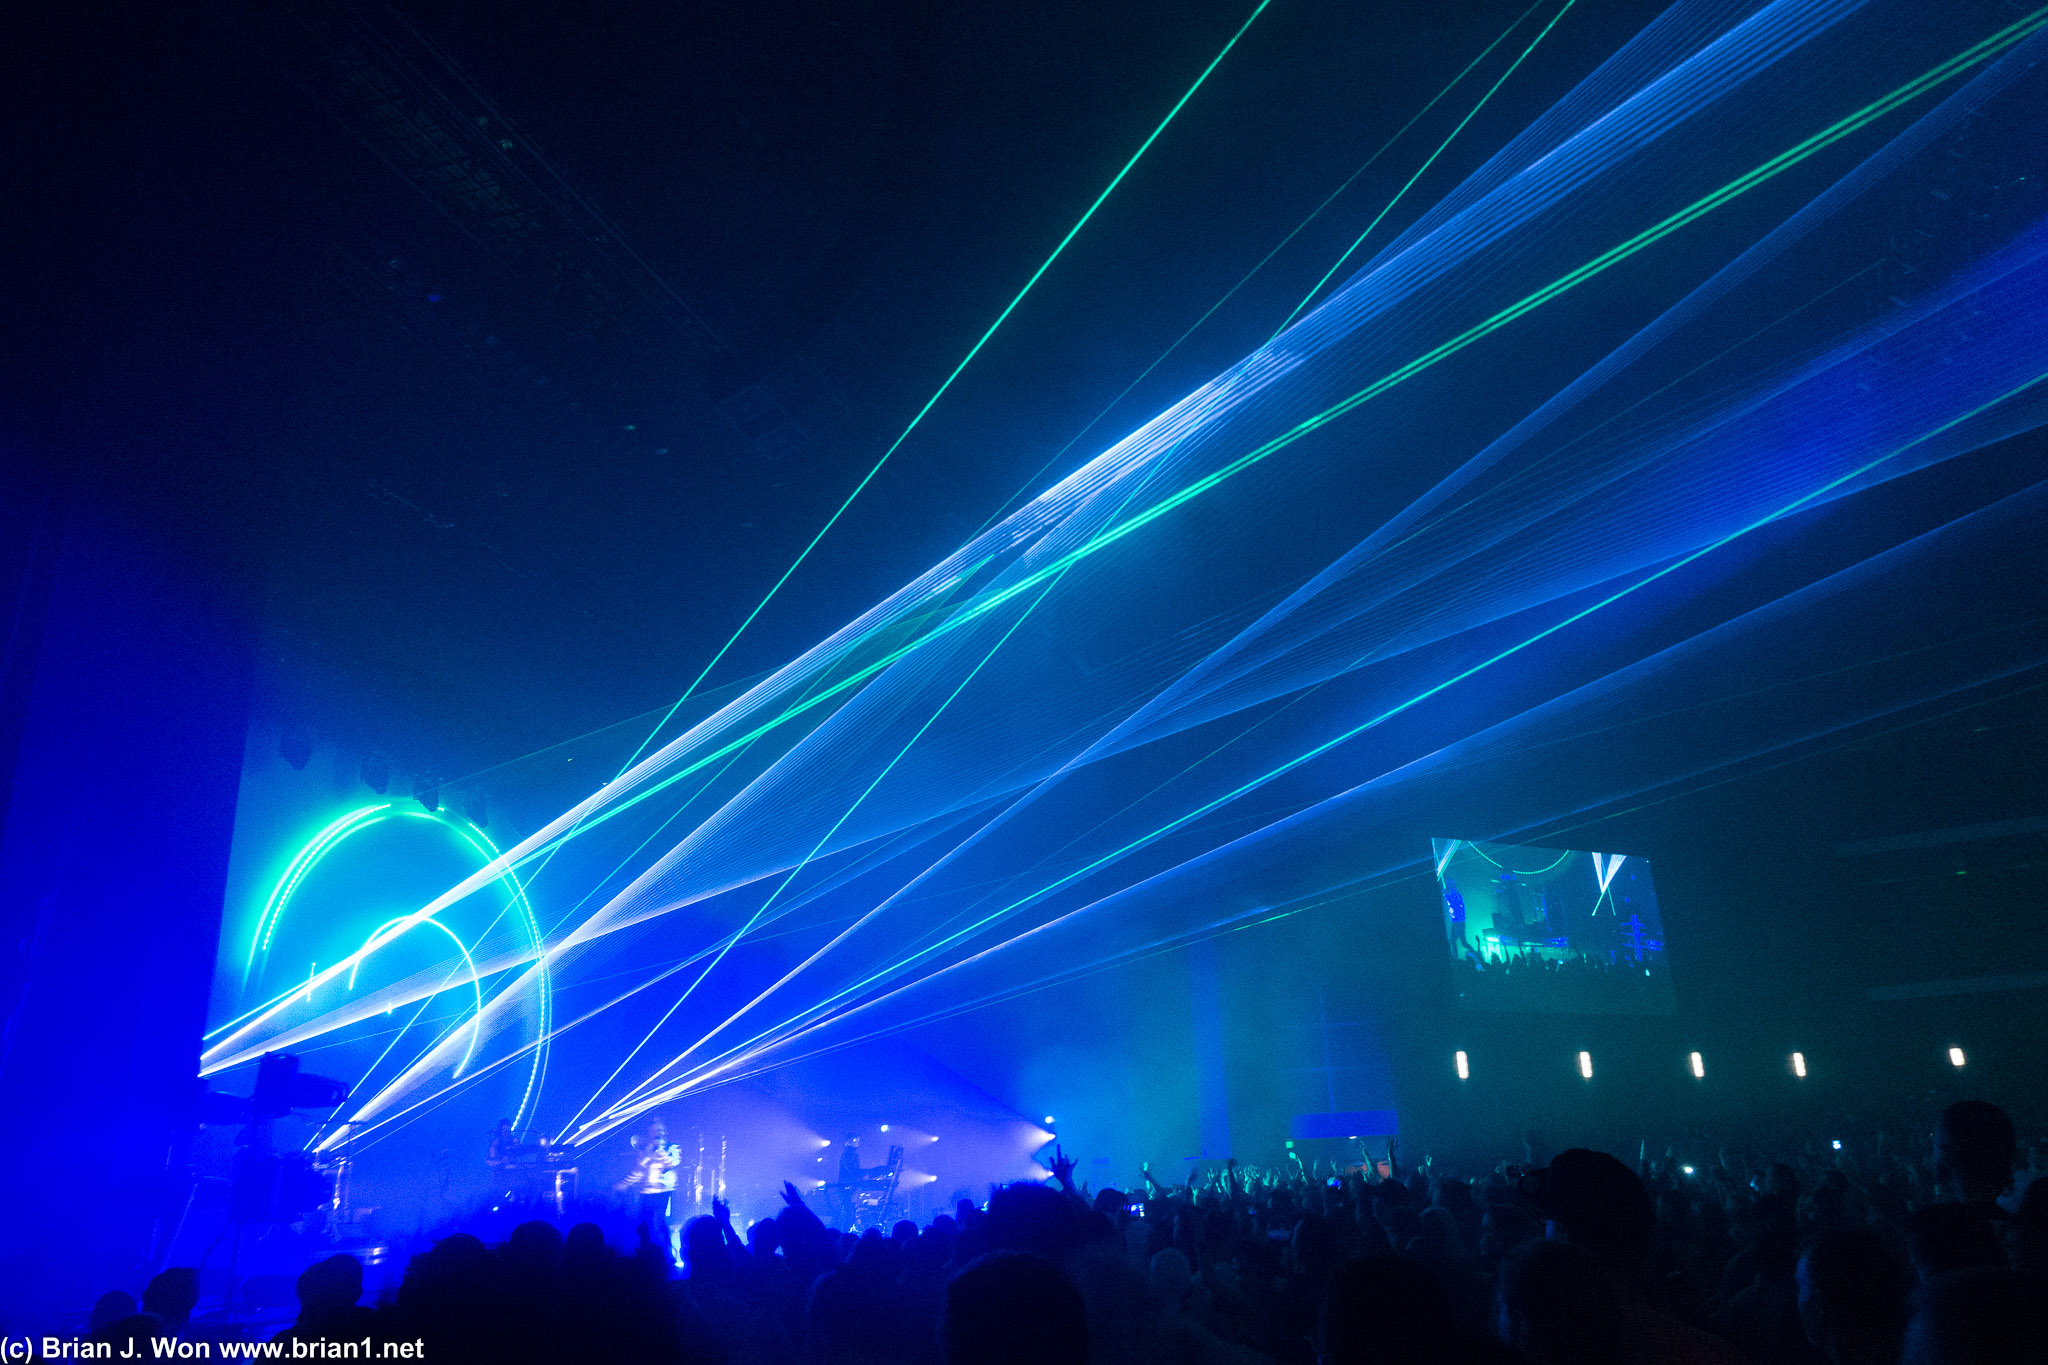 Lasers.